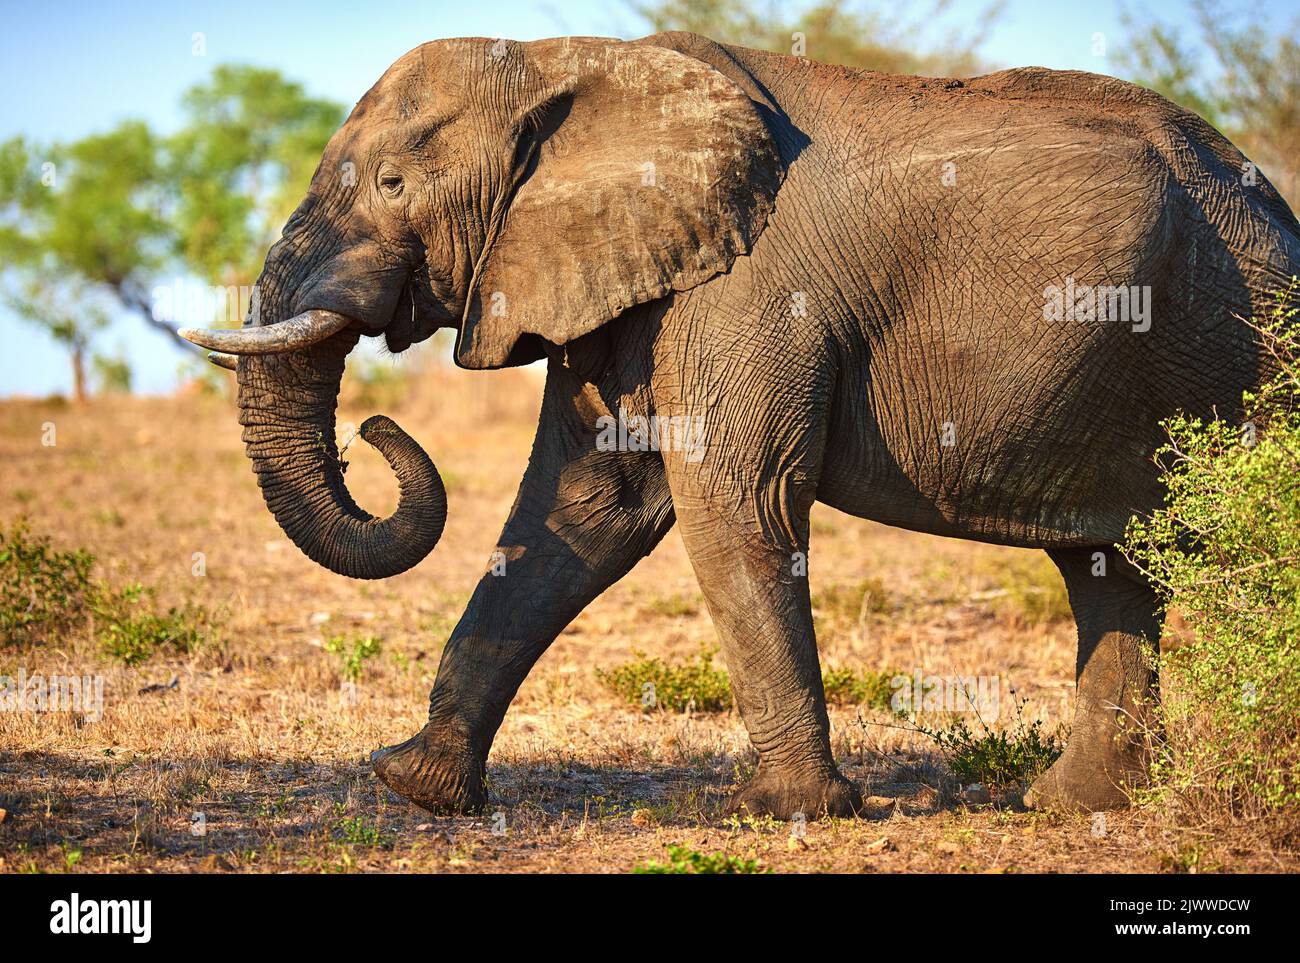 Thunderous footsteps. an elephant in its natural habitat. Stock Photo